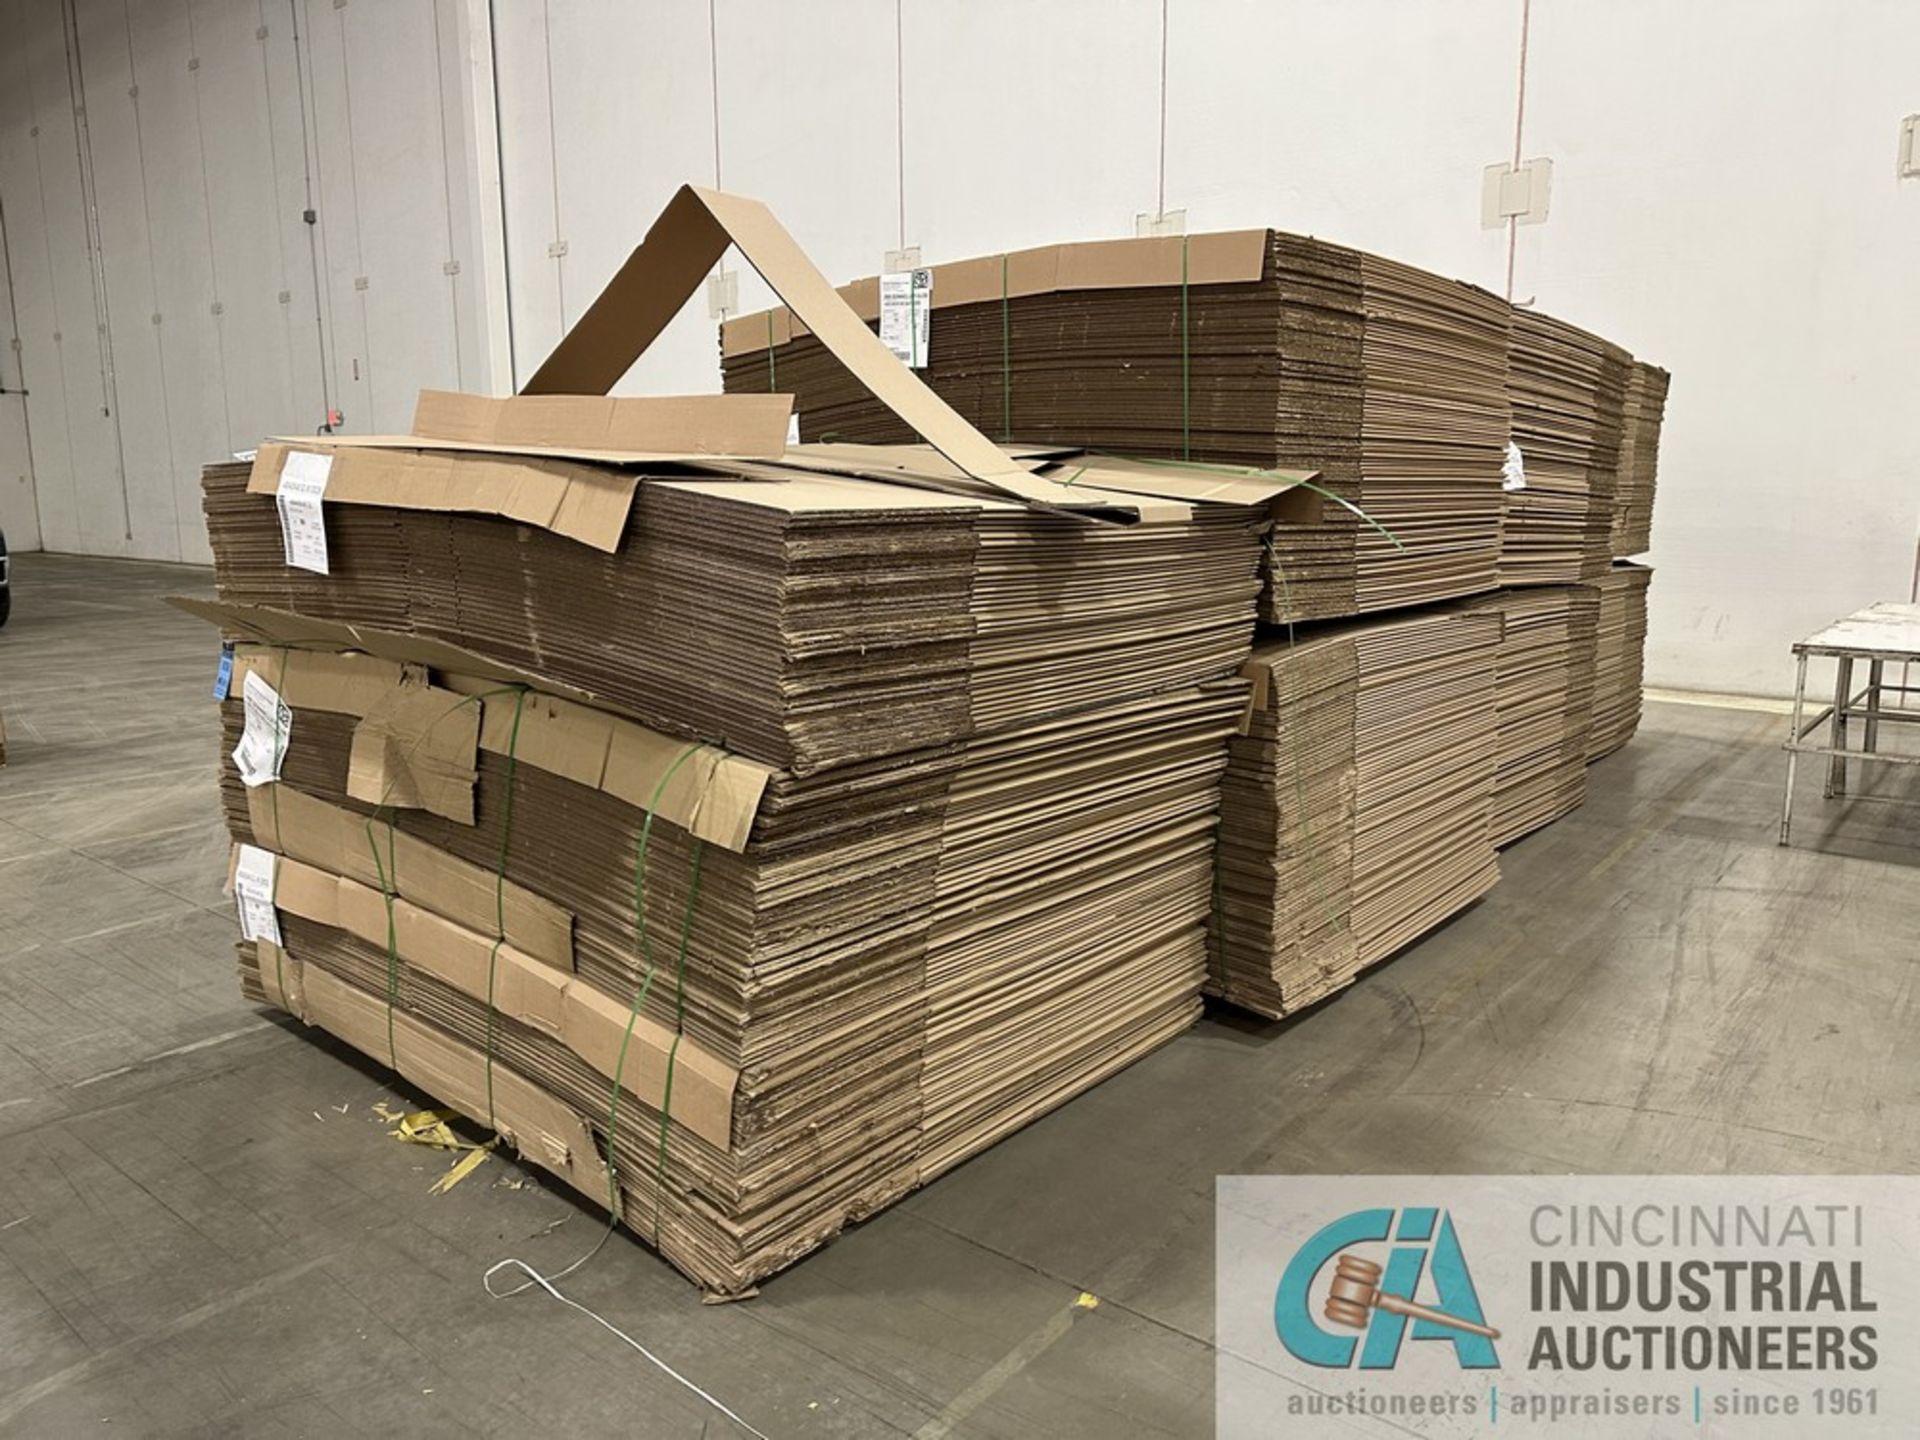 (LOT) 4 SKIDS OF 48" X 40" X 48" GAYLORD BOXES APPROX. 550 TOTAL PCS **$250.00 LOADING FEE** - Image 3 of 4